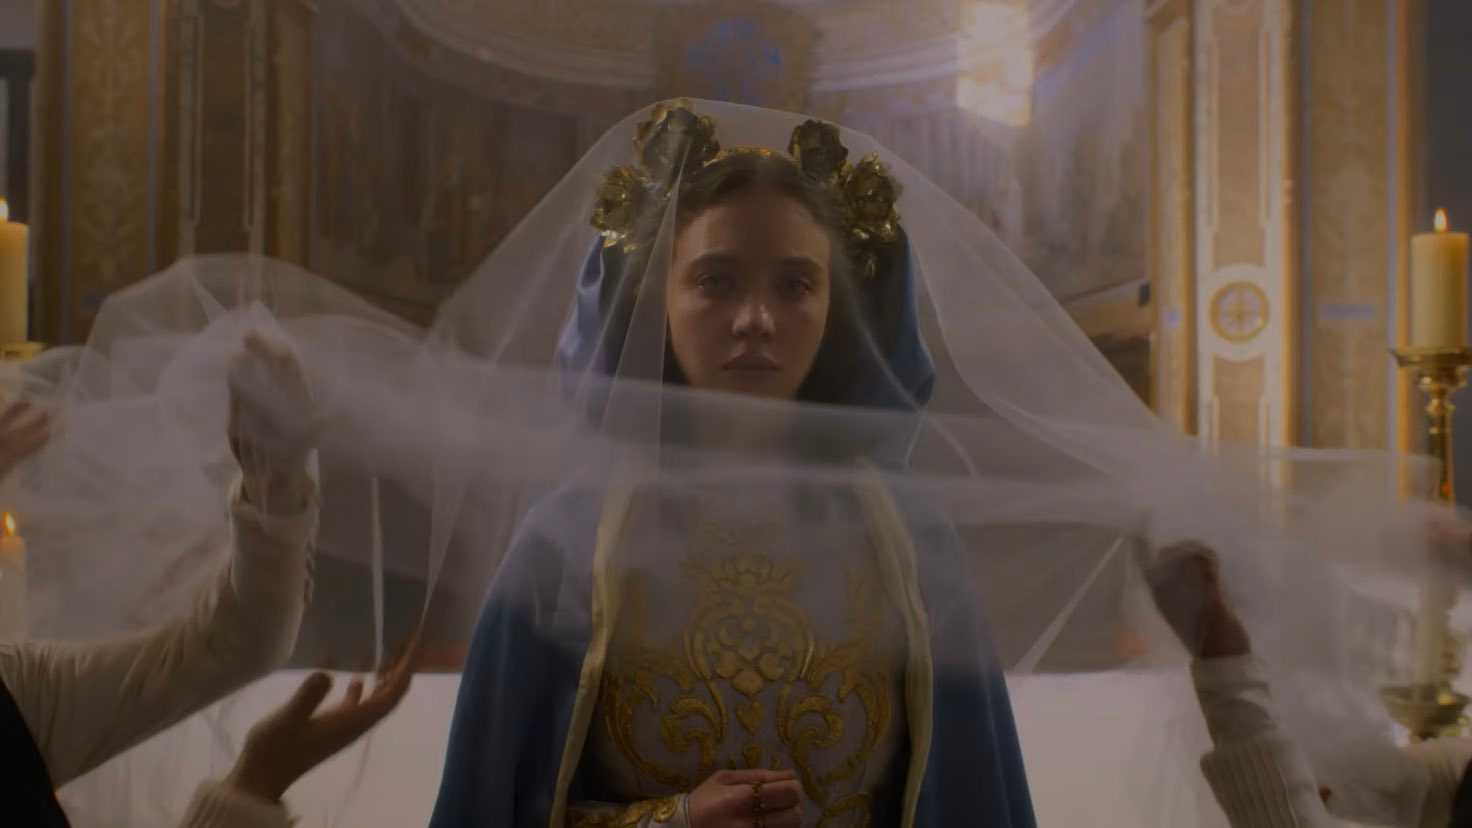 WATCH: Sydney Sweeney’s nun with unholy pregnancy in ‘Immaculate’ trailer